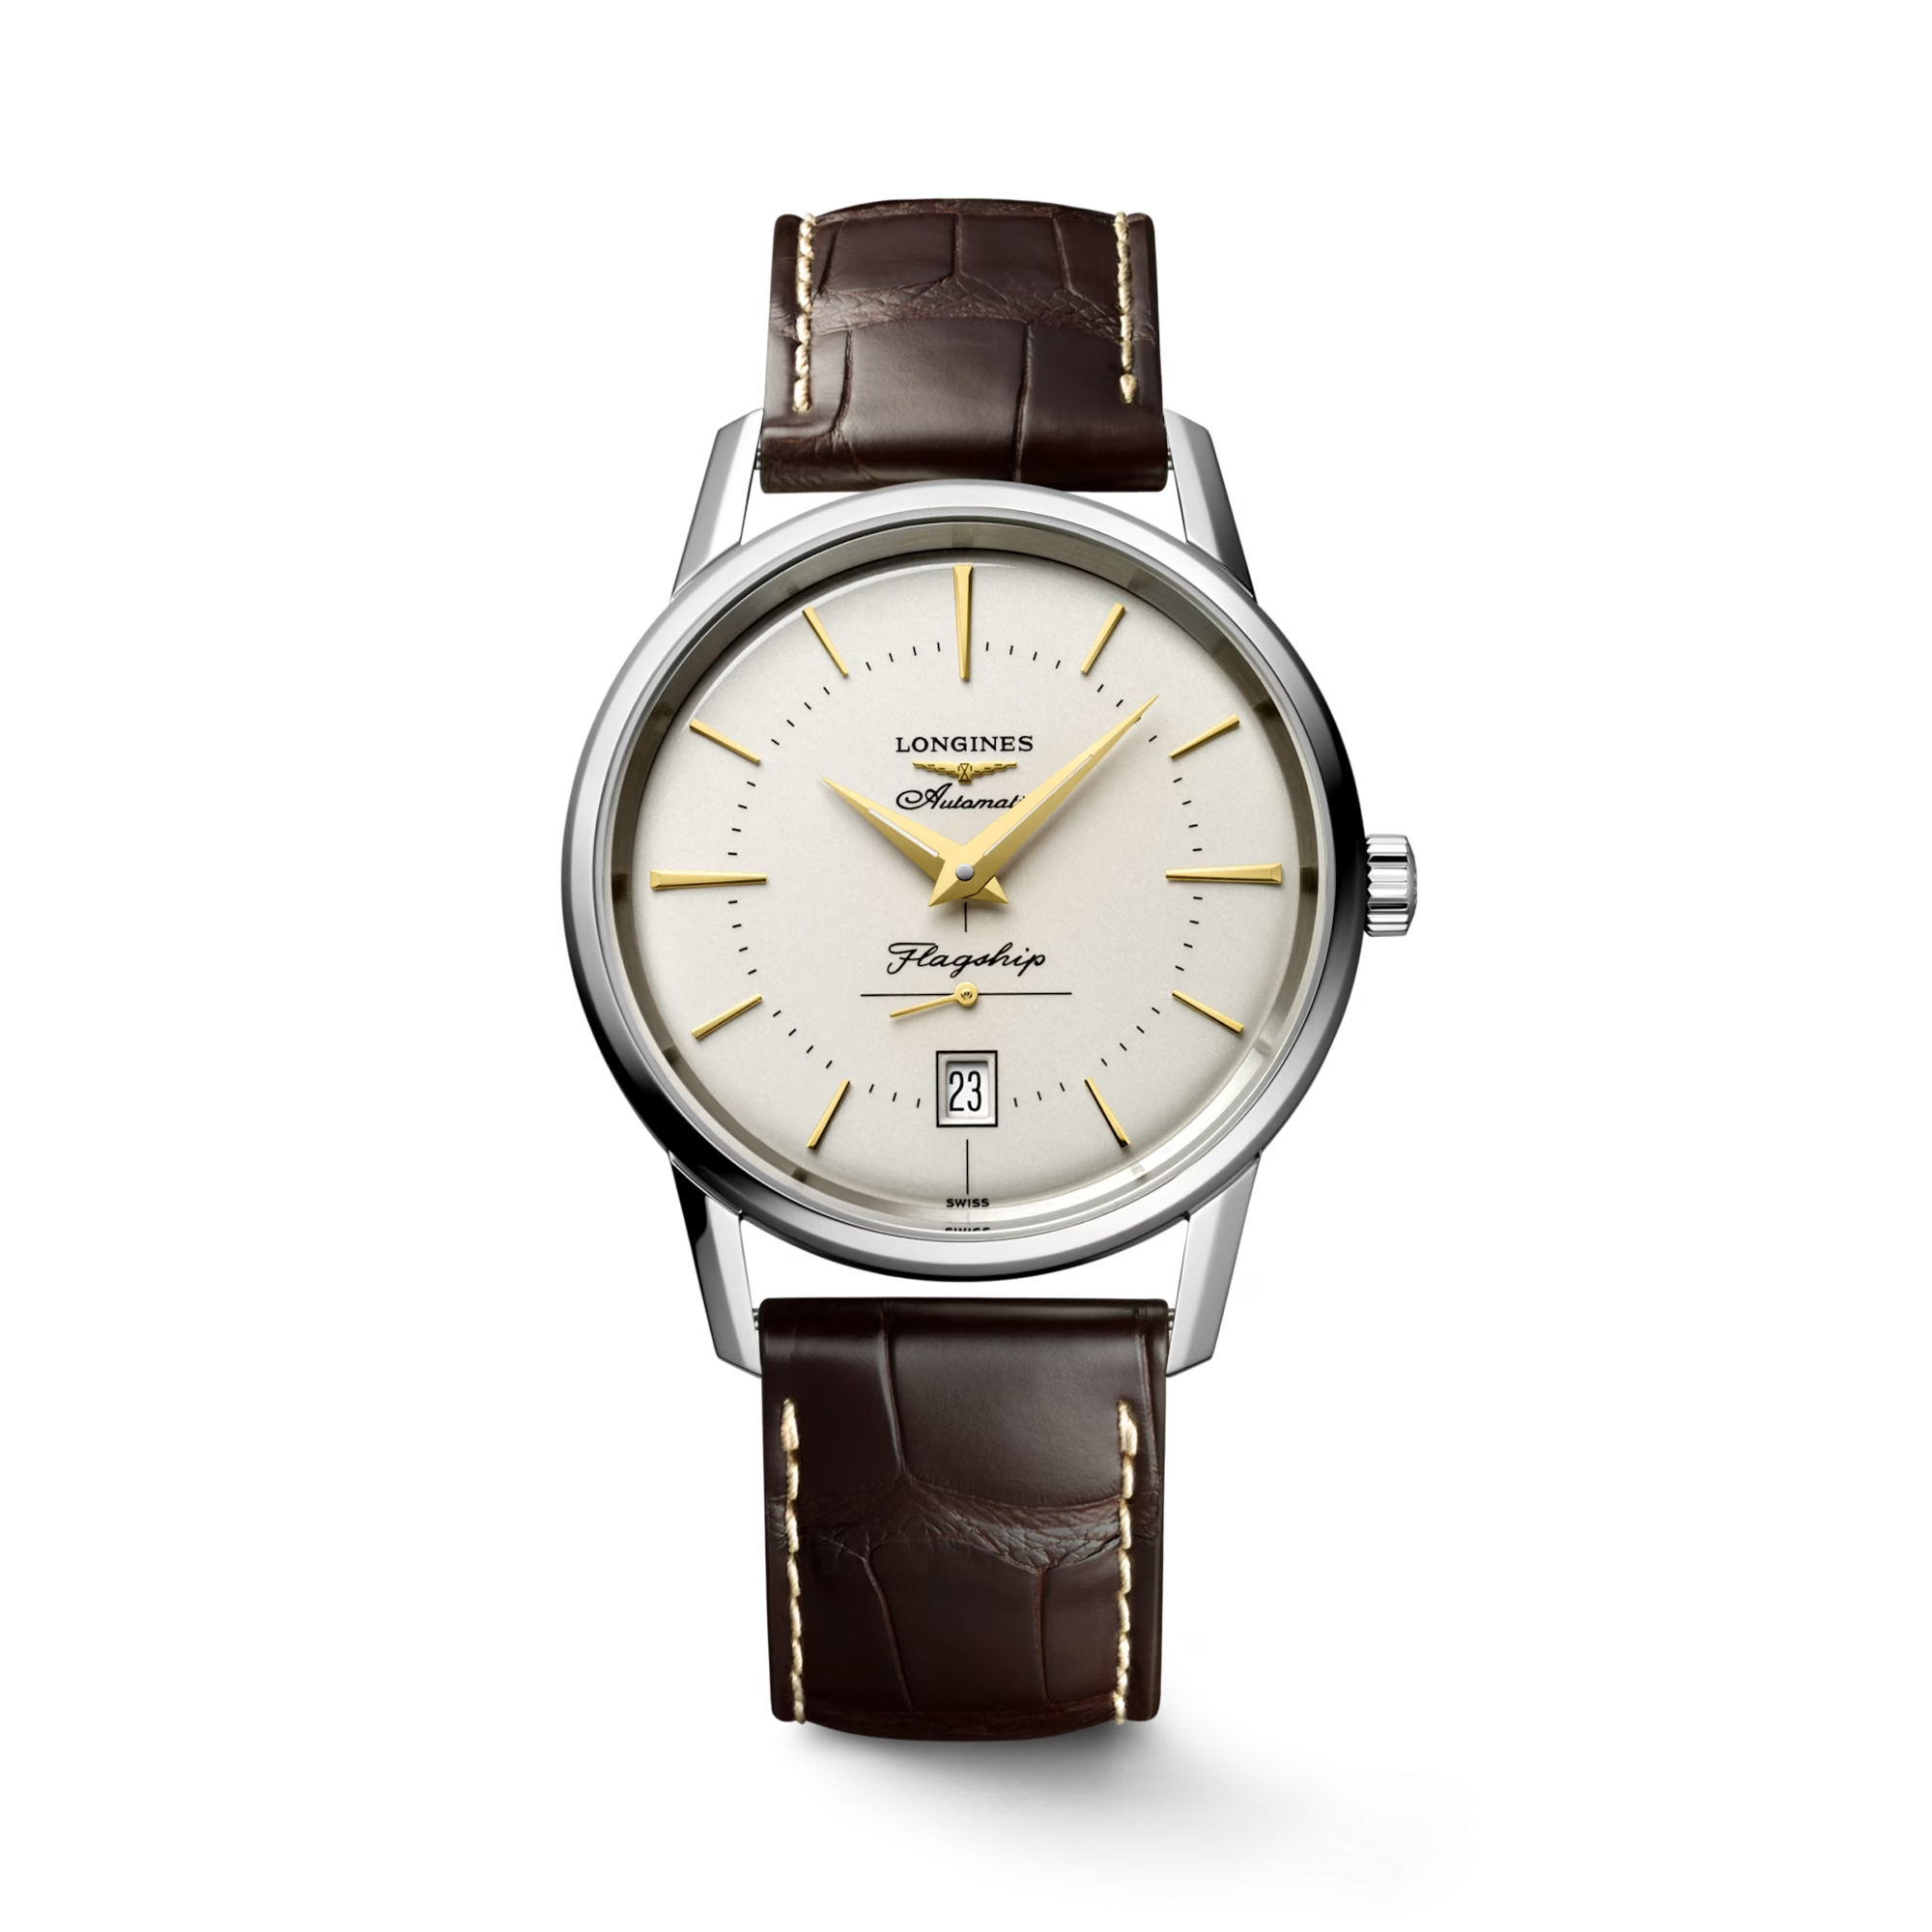 Longines Flagship Heritage 38.5mm, Silver Dial, Baton Numerals_1